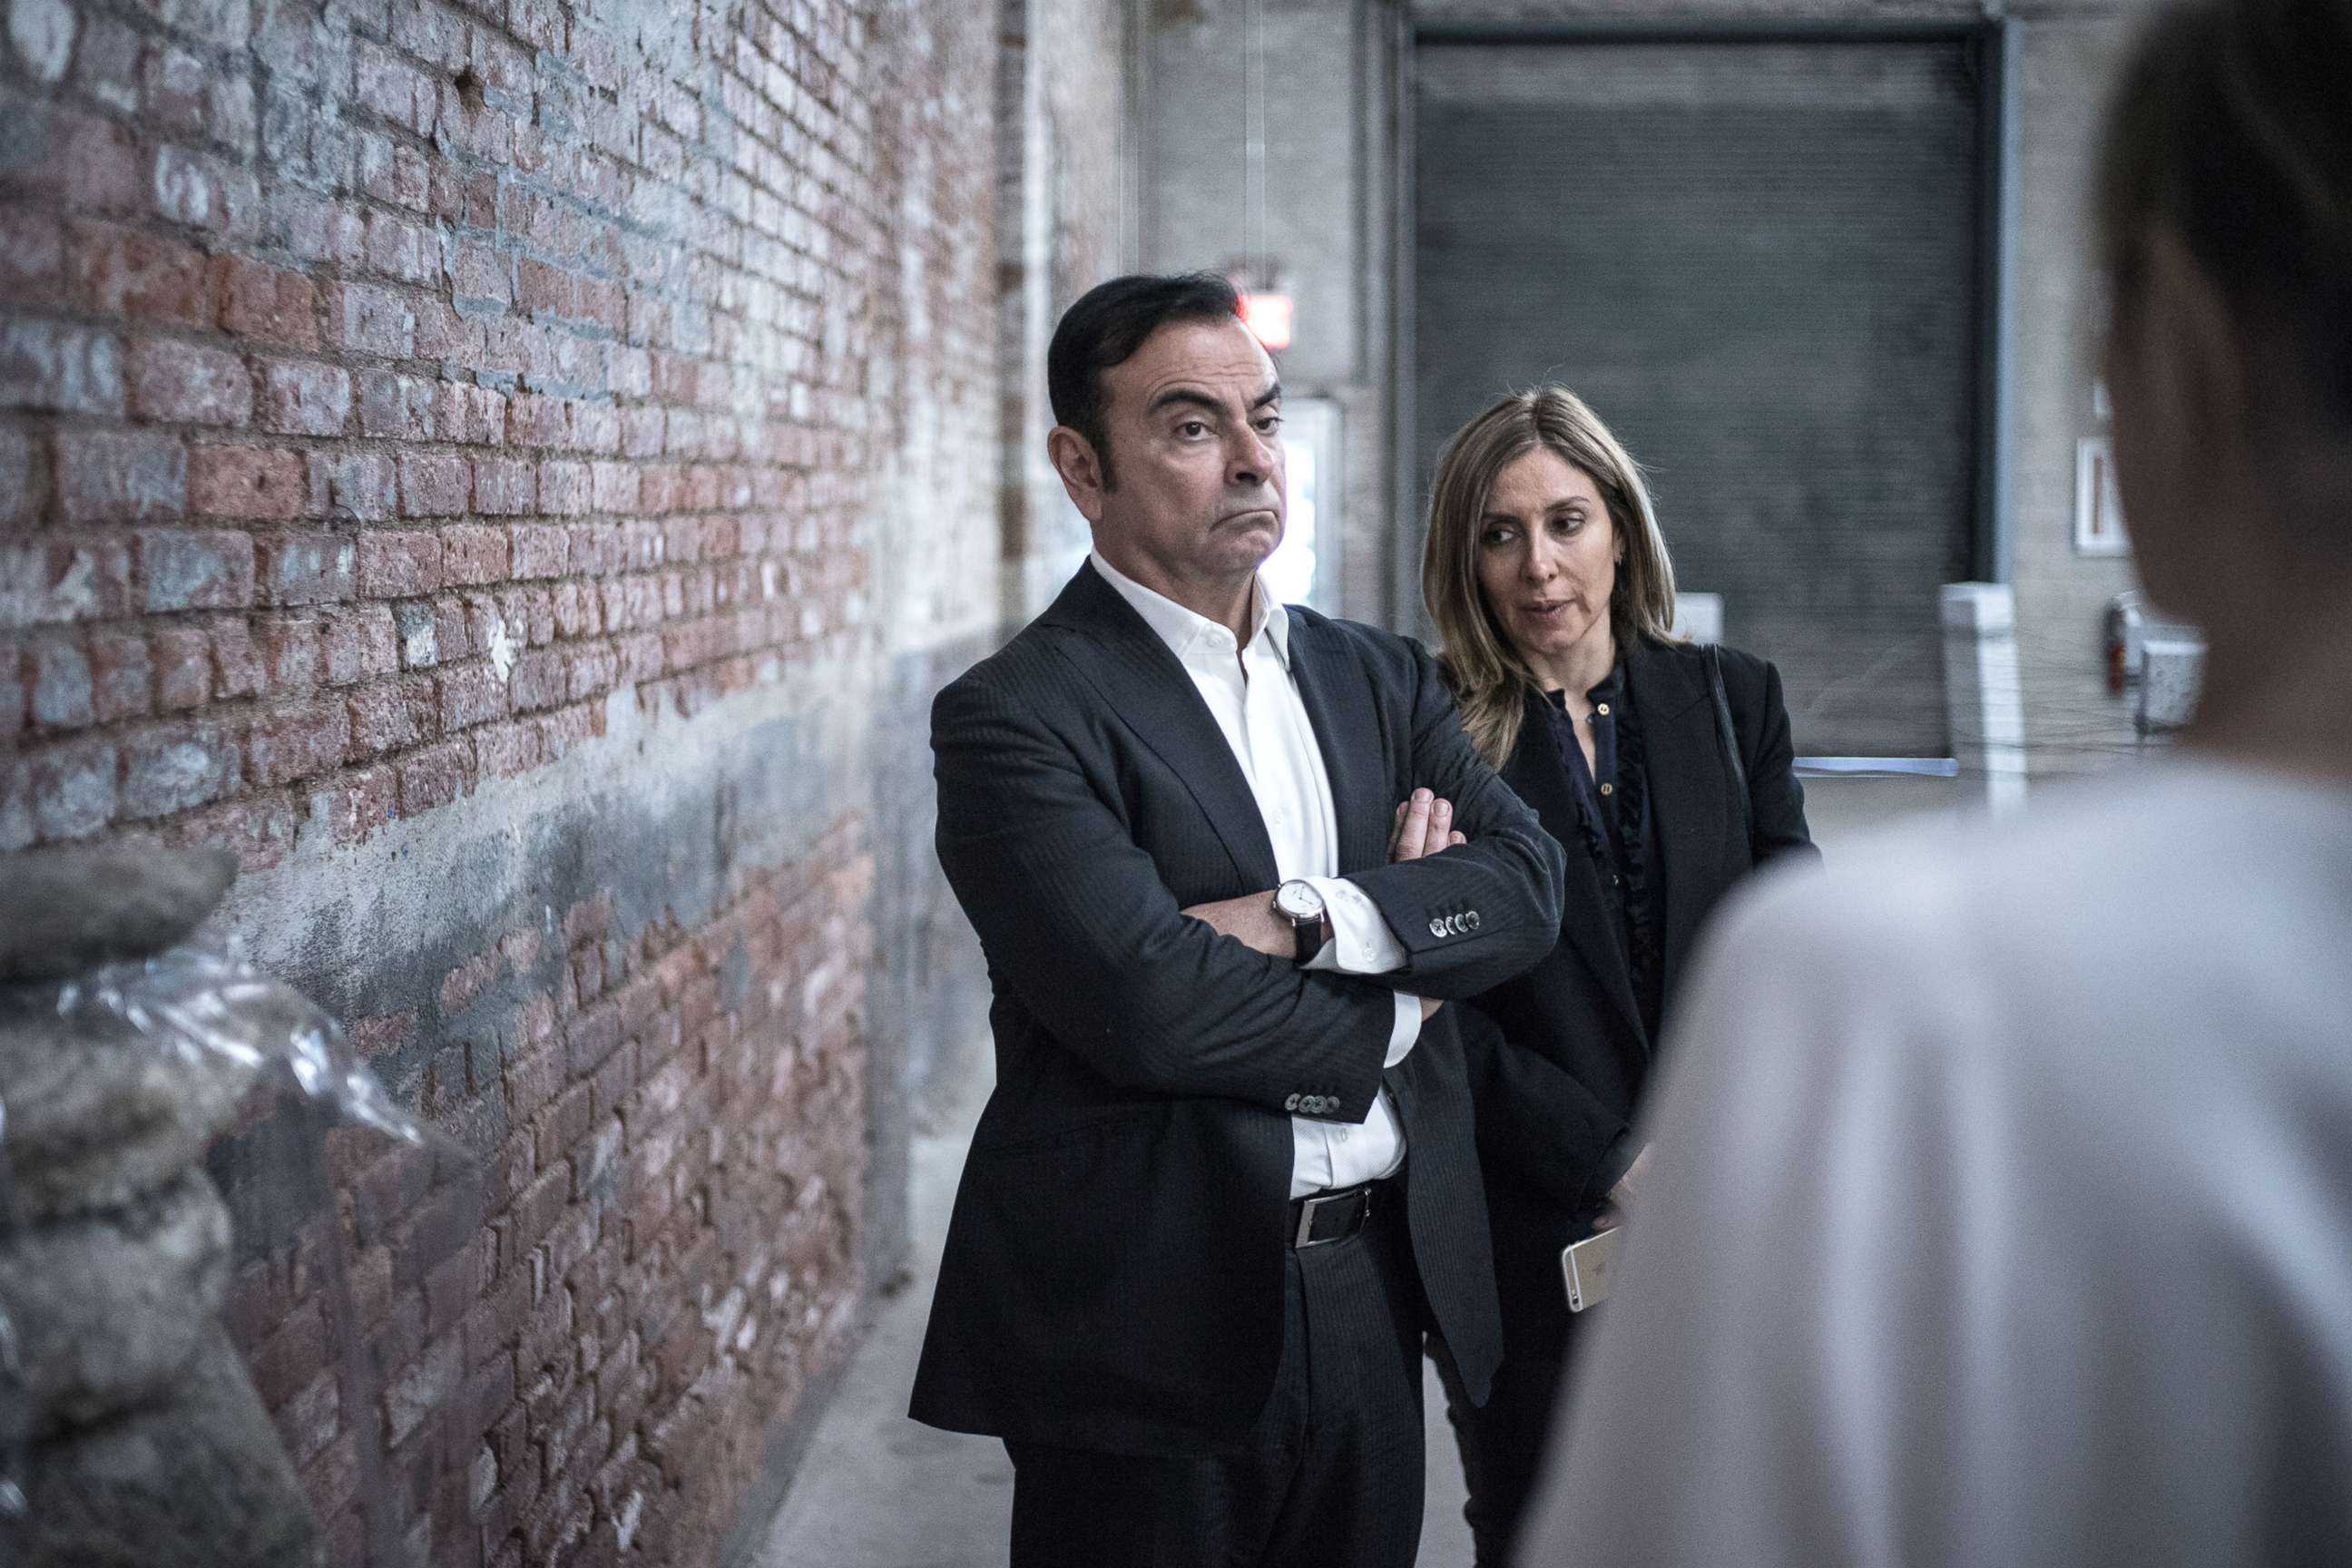 PHOTO: Carlos Ghosn, chairman of Renault SAS, Nissan Motor Co., and Mitsubishi Motors Corp., left, and his wife Carole Nahas view artwork at the DIA Art Foundation in New York, May 6, 2017.